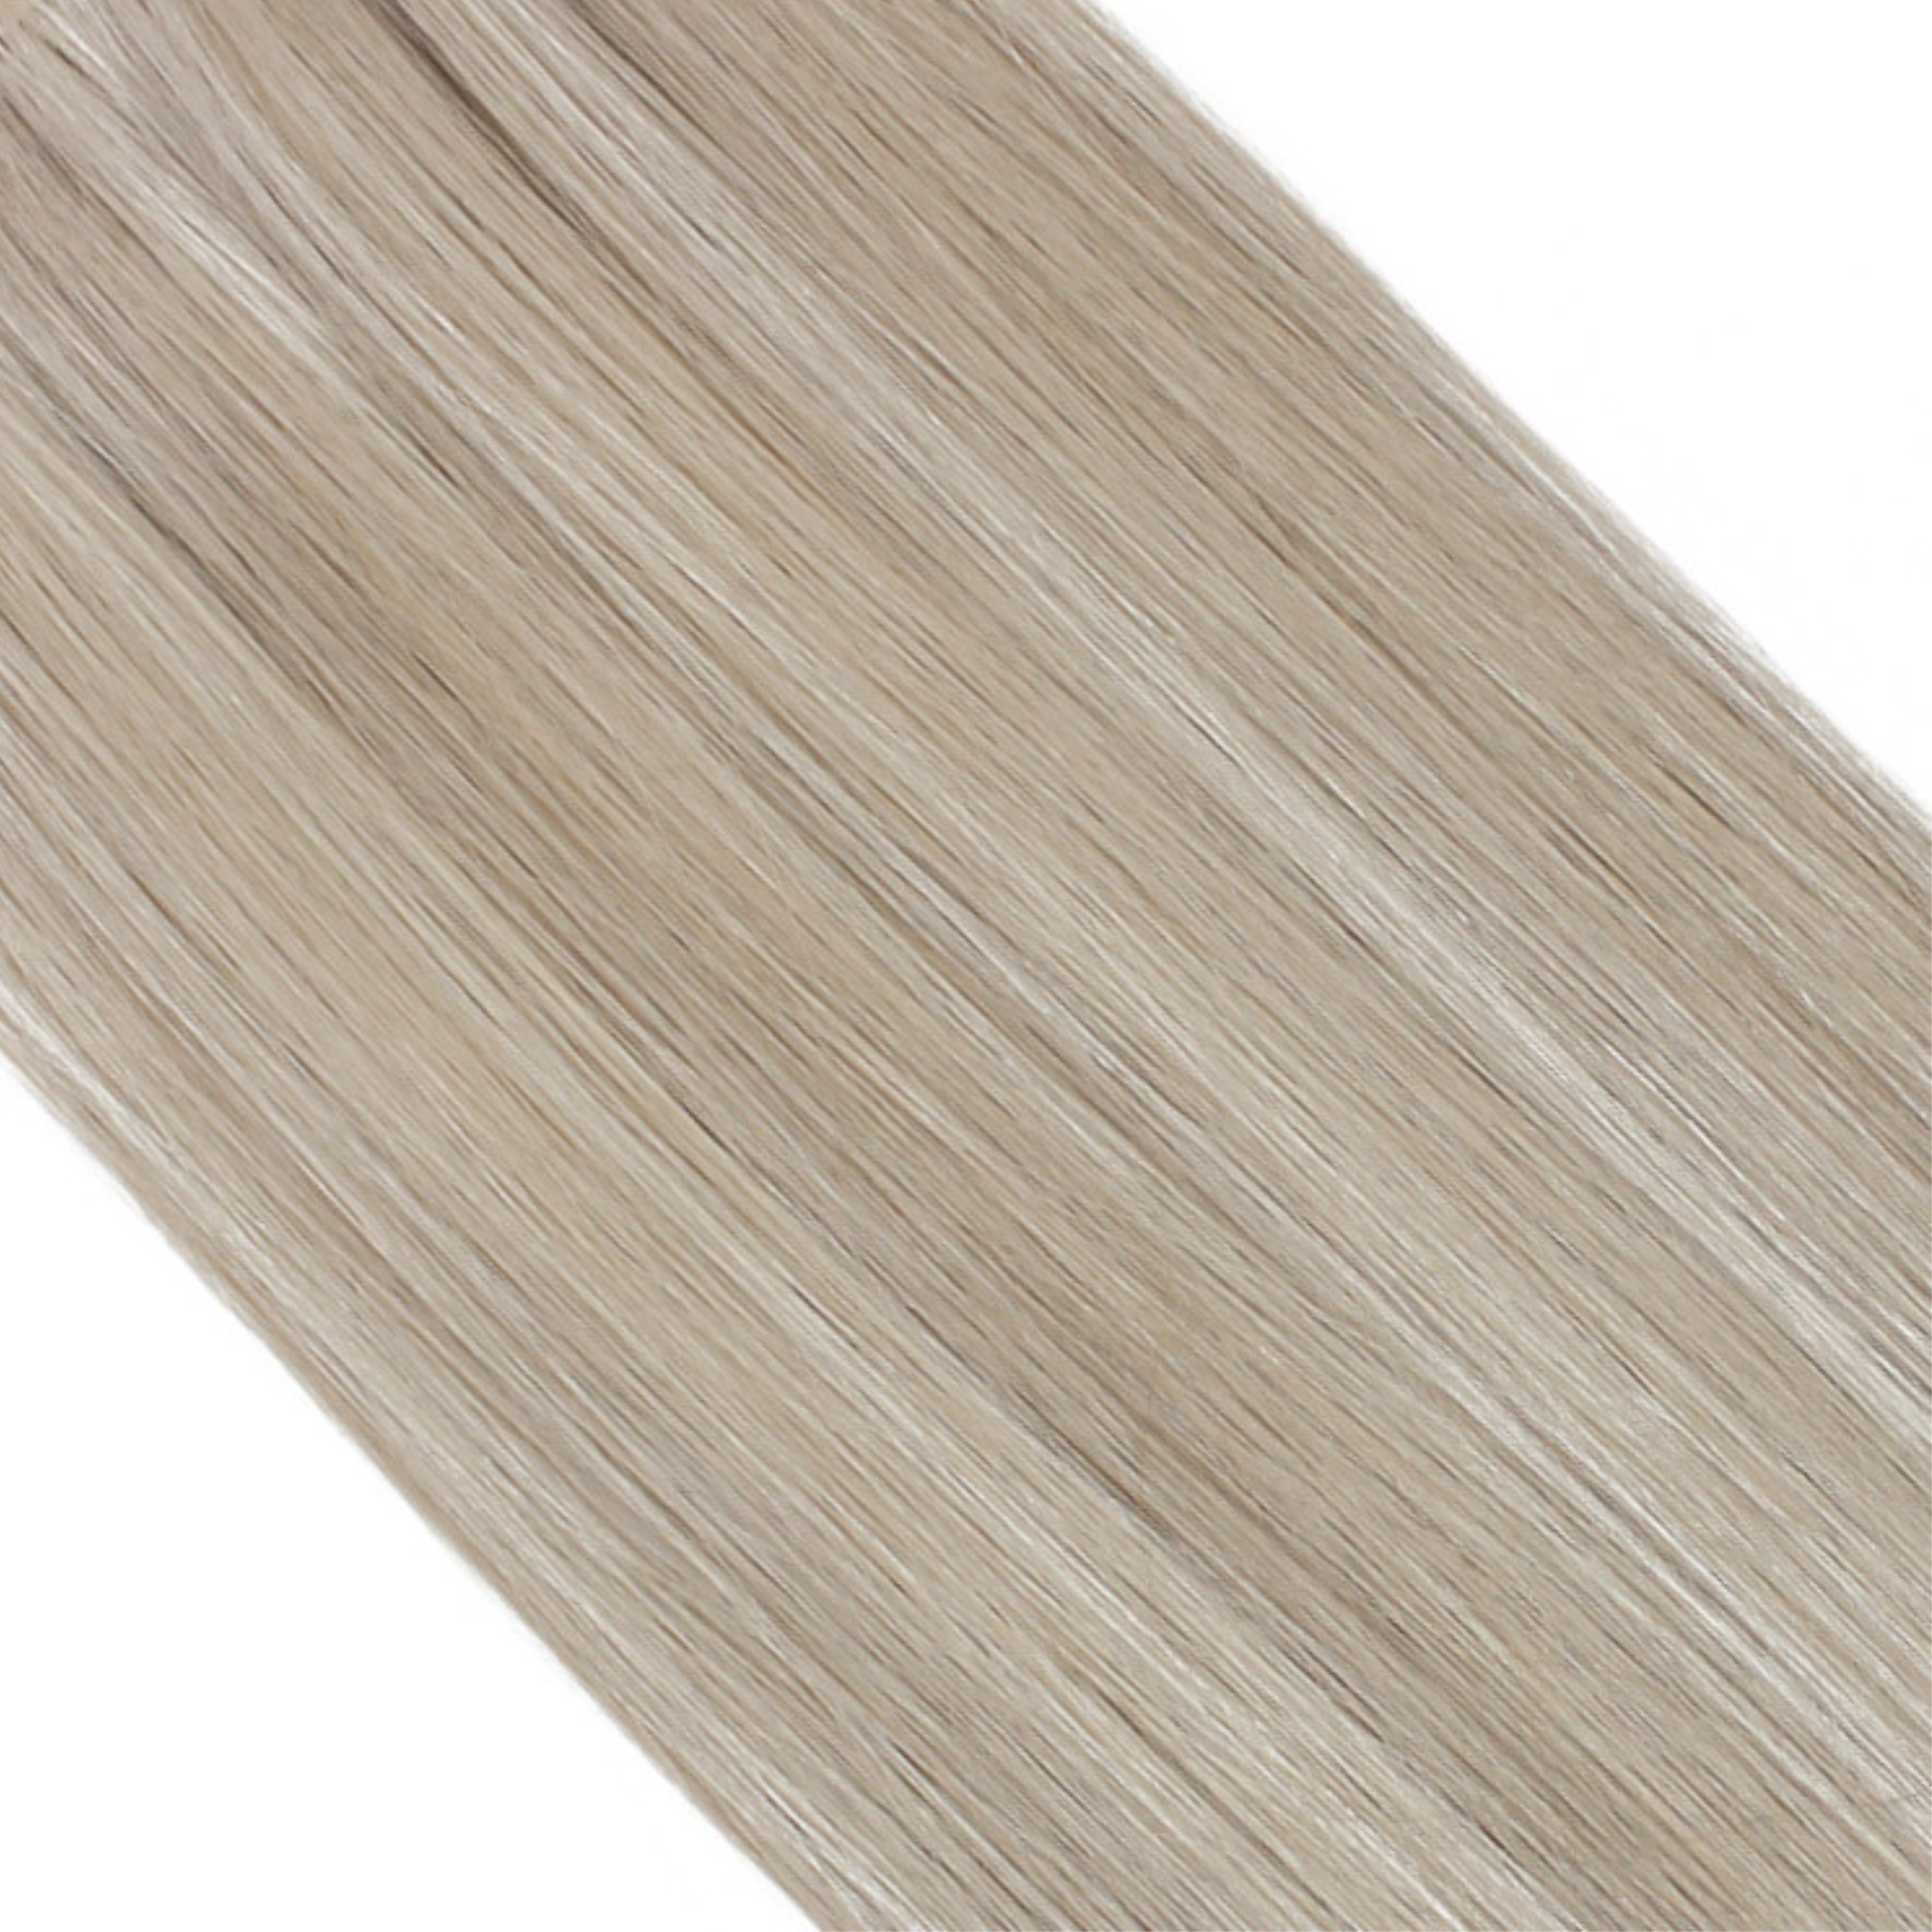 "hair rehab london 20" length 180 grams weight luxe clip-in hair extensions shade titled steel blonde"